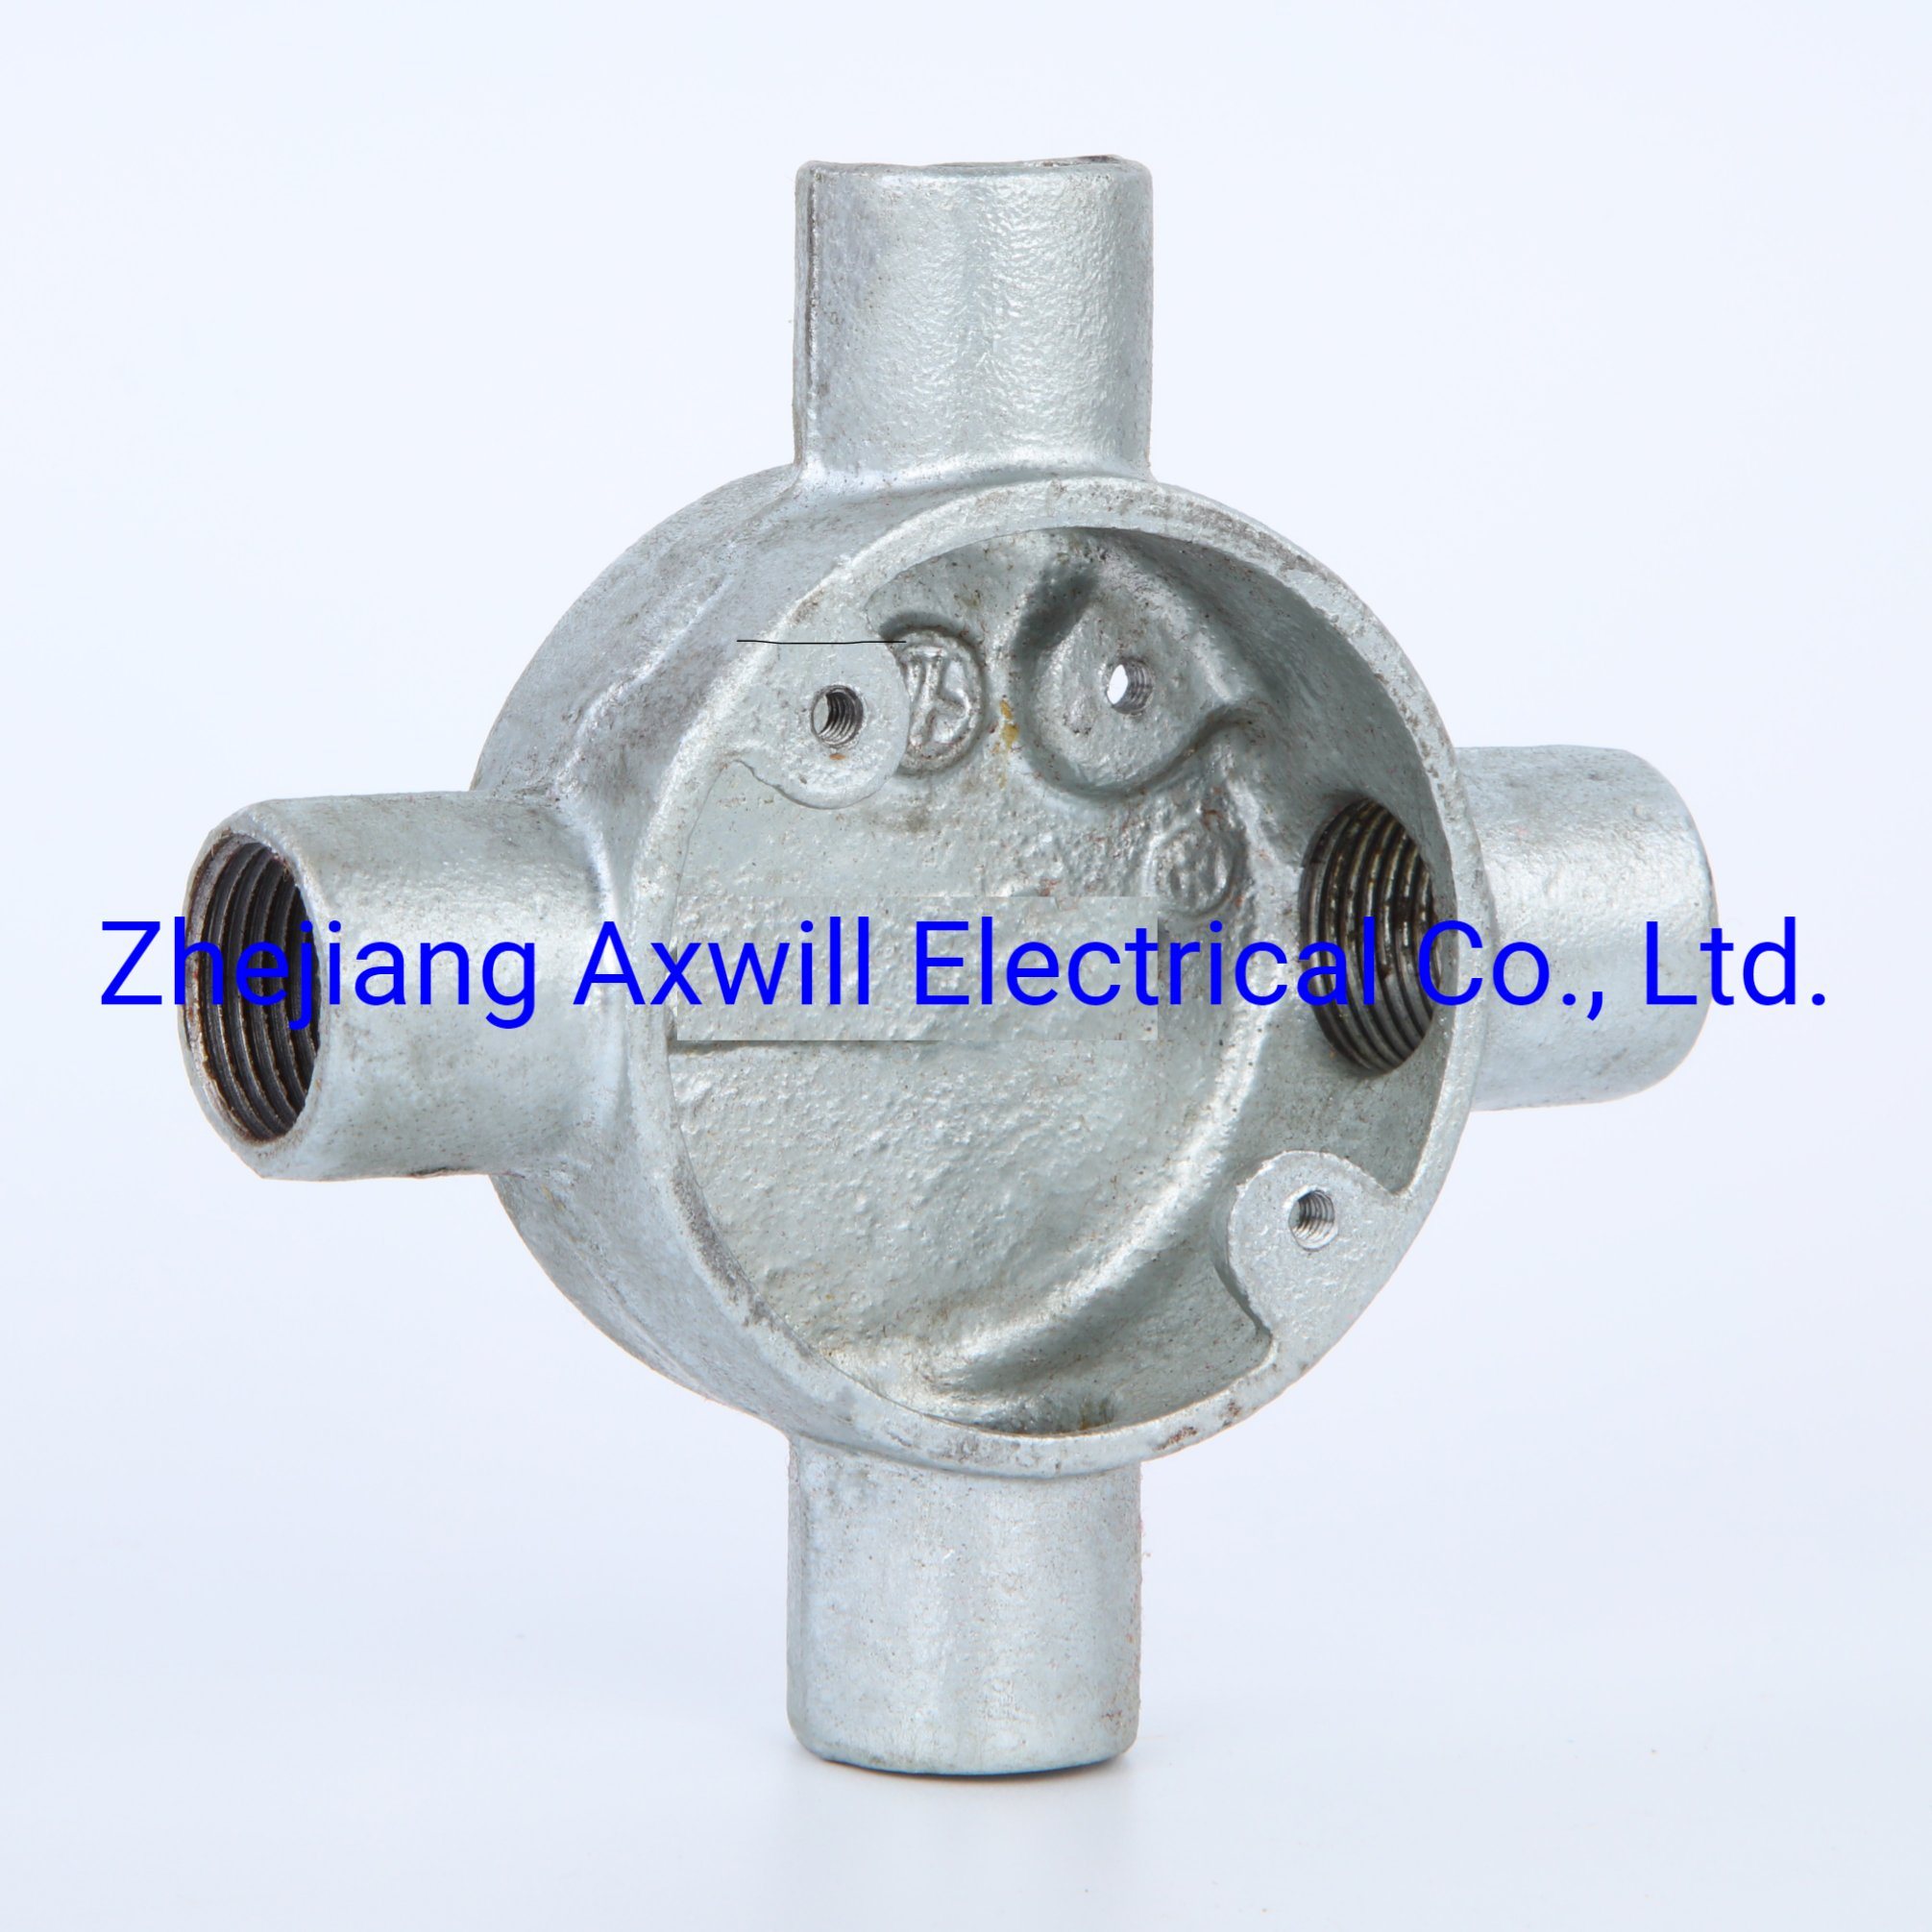 2021 UL Listed Conduit Malleable Iron Junction Terminal Y Way Boxes